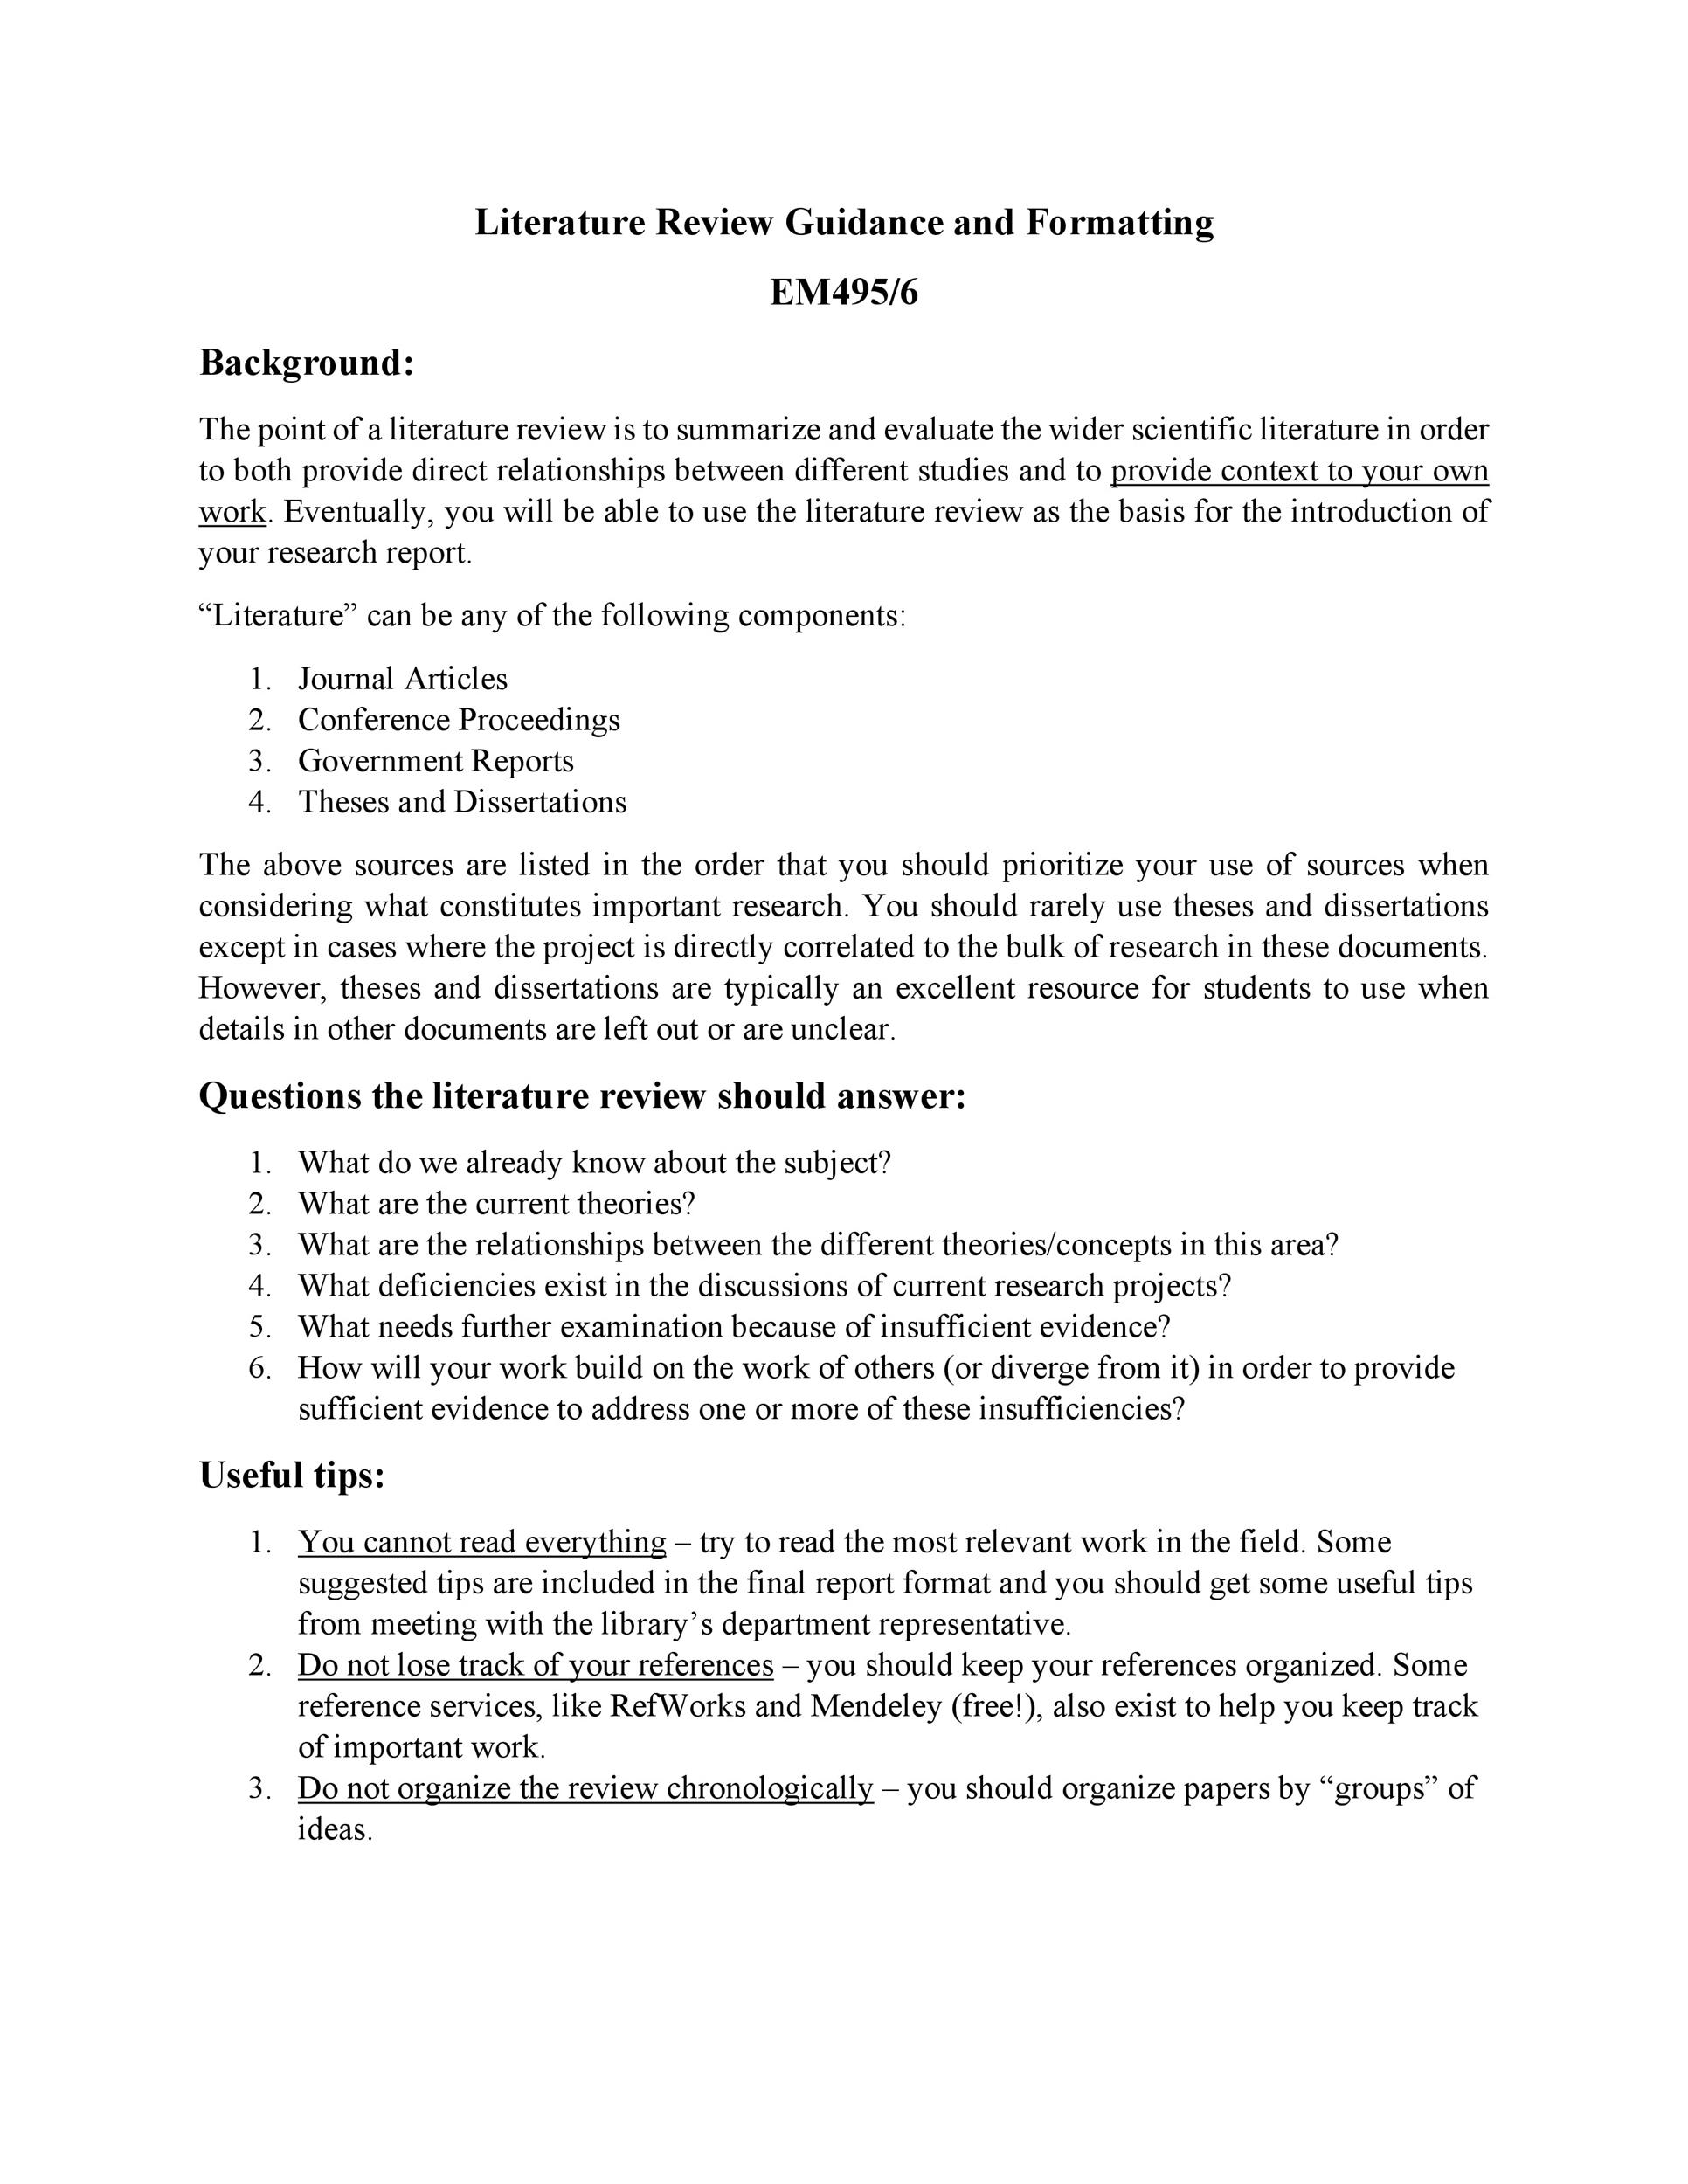 Free literature review template 25